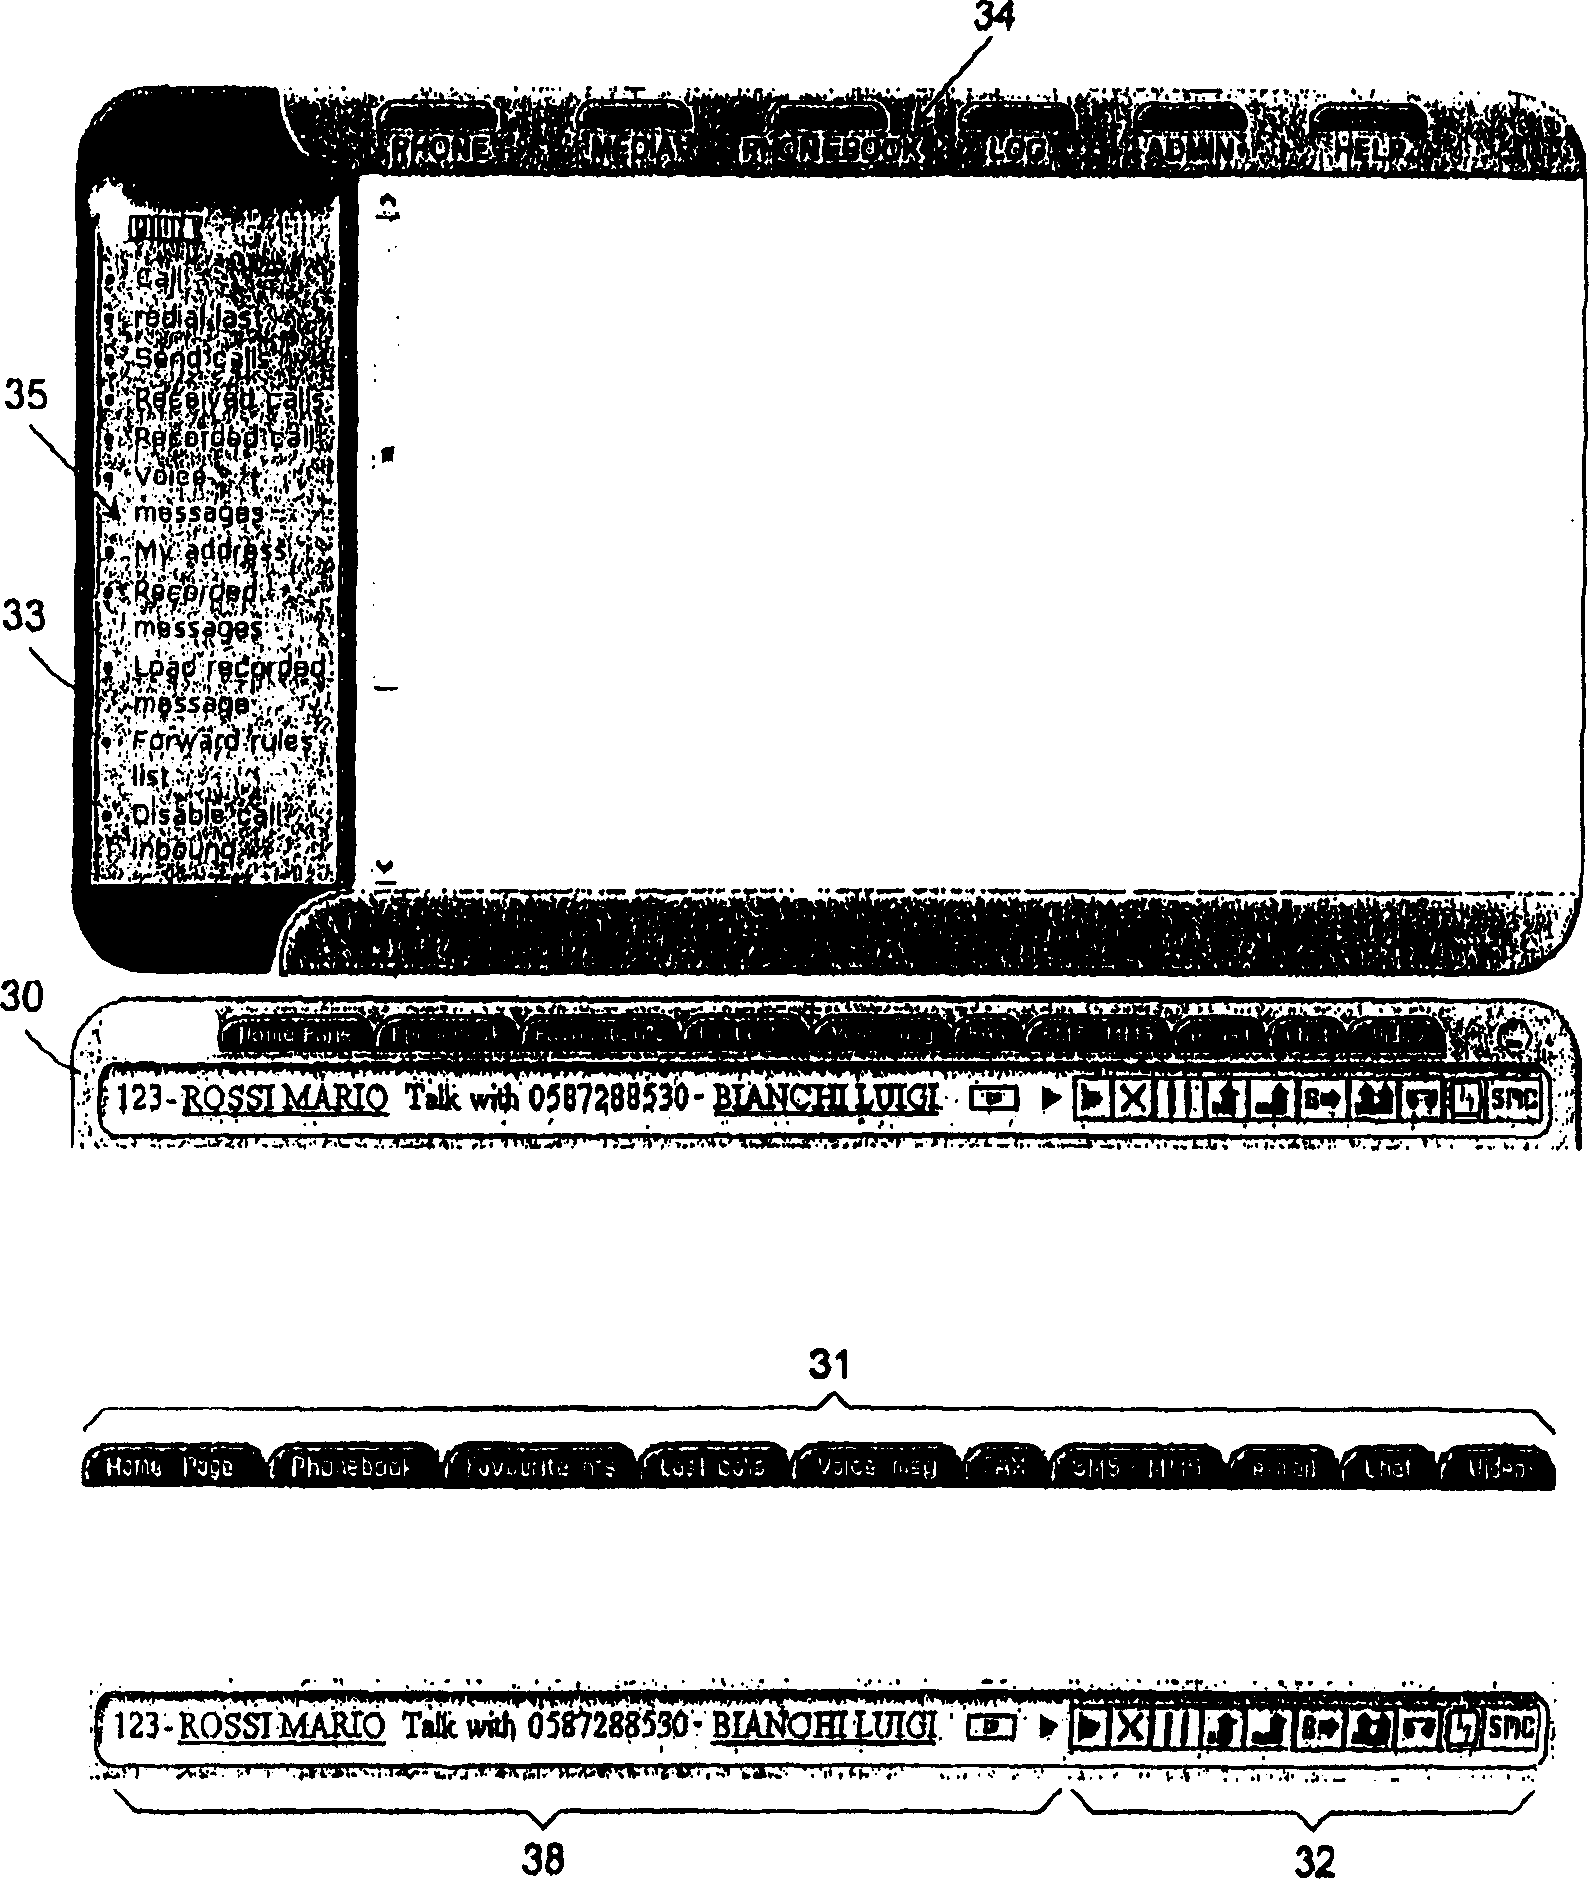 Method and apparatus for unified management of different type of communications over lan,wan and internet networks,using a web browser